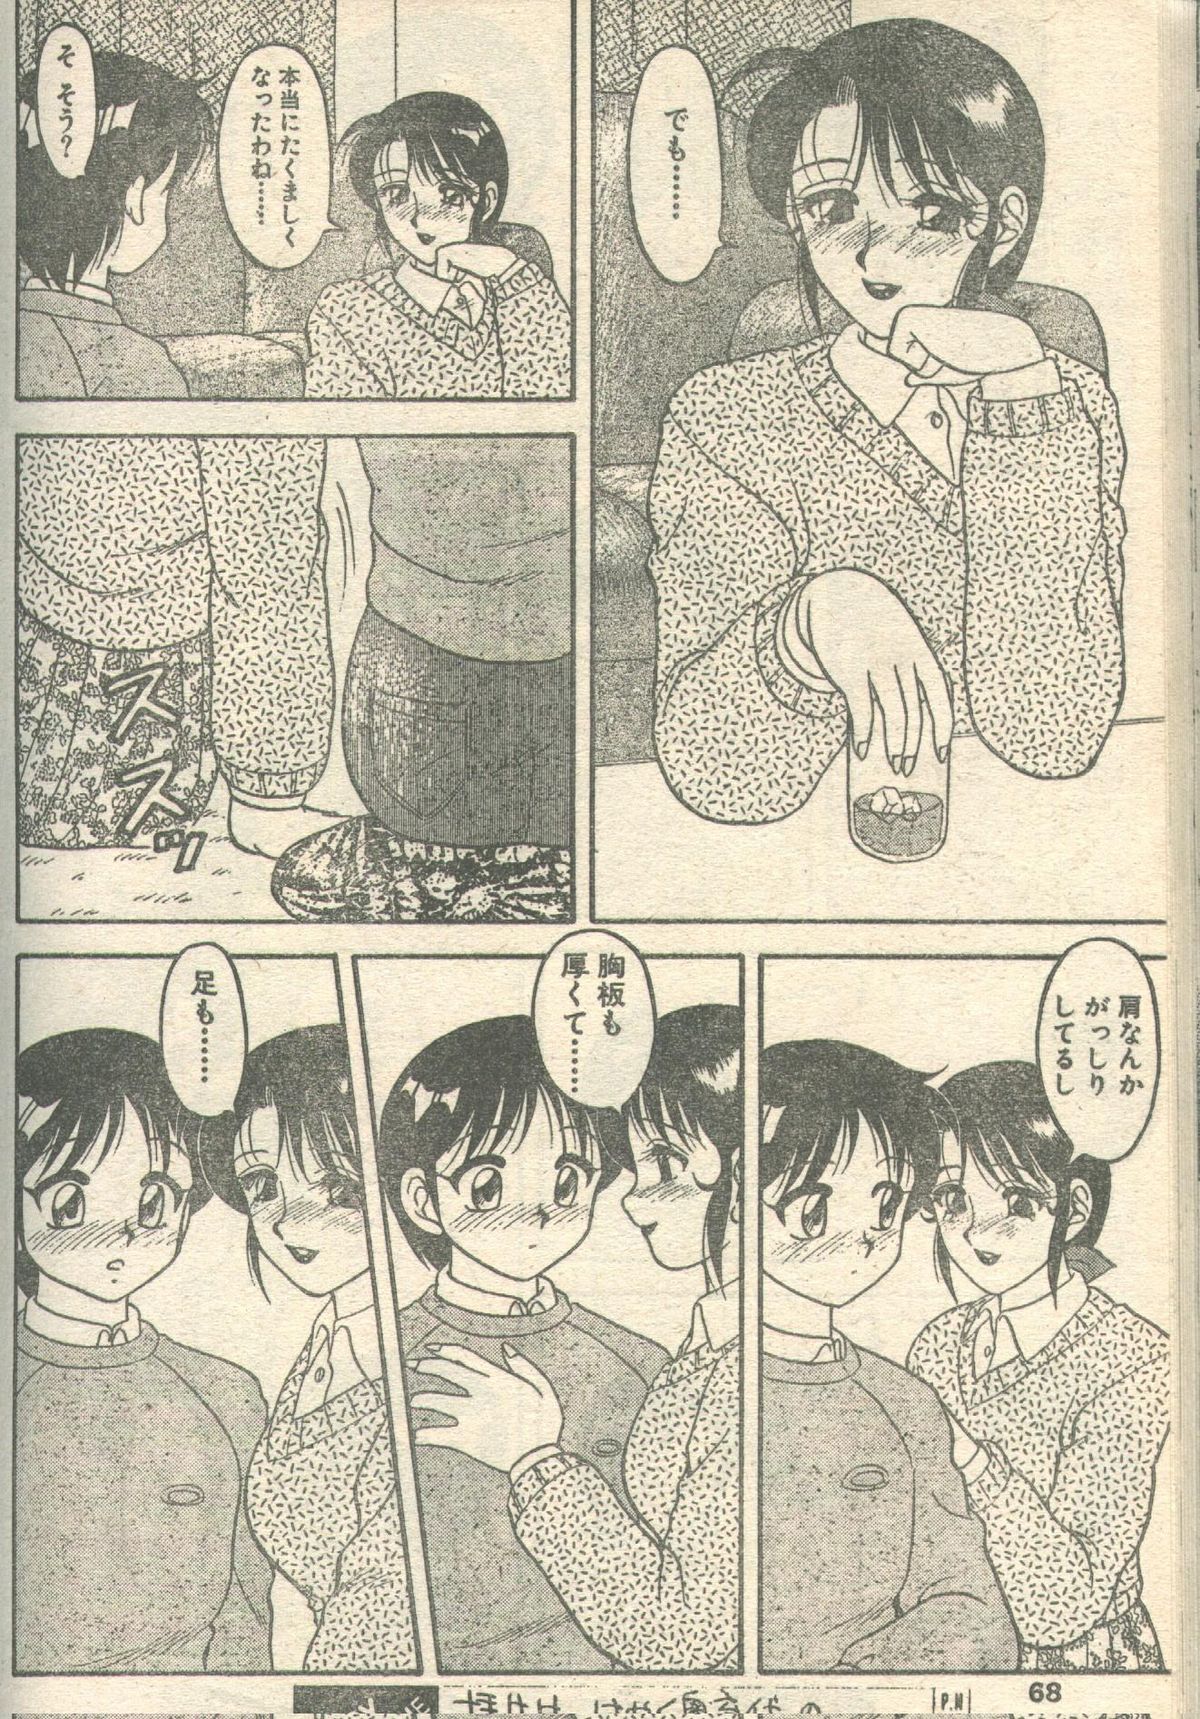 Candy Time 1993-01 [Incomplete] page 27 full